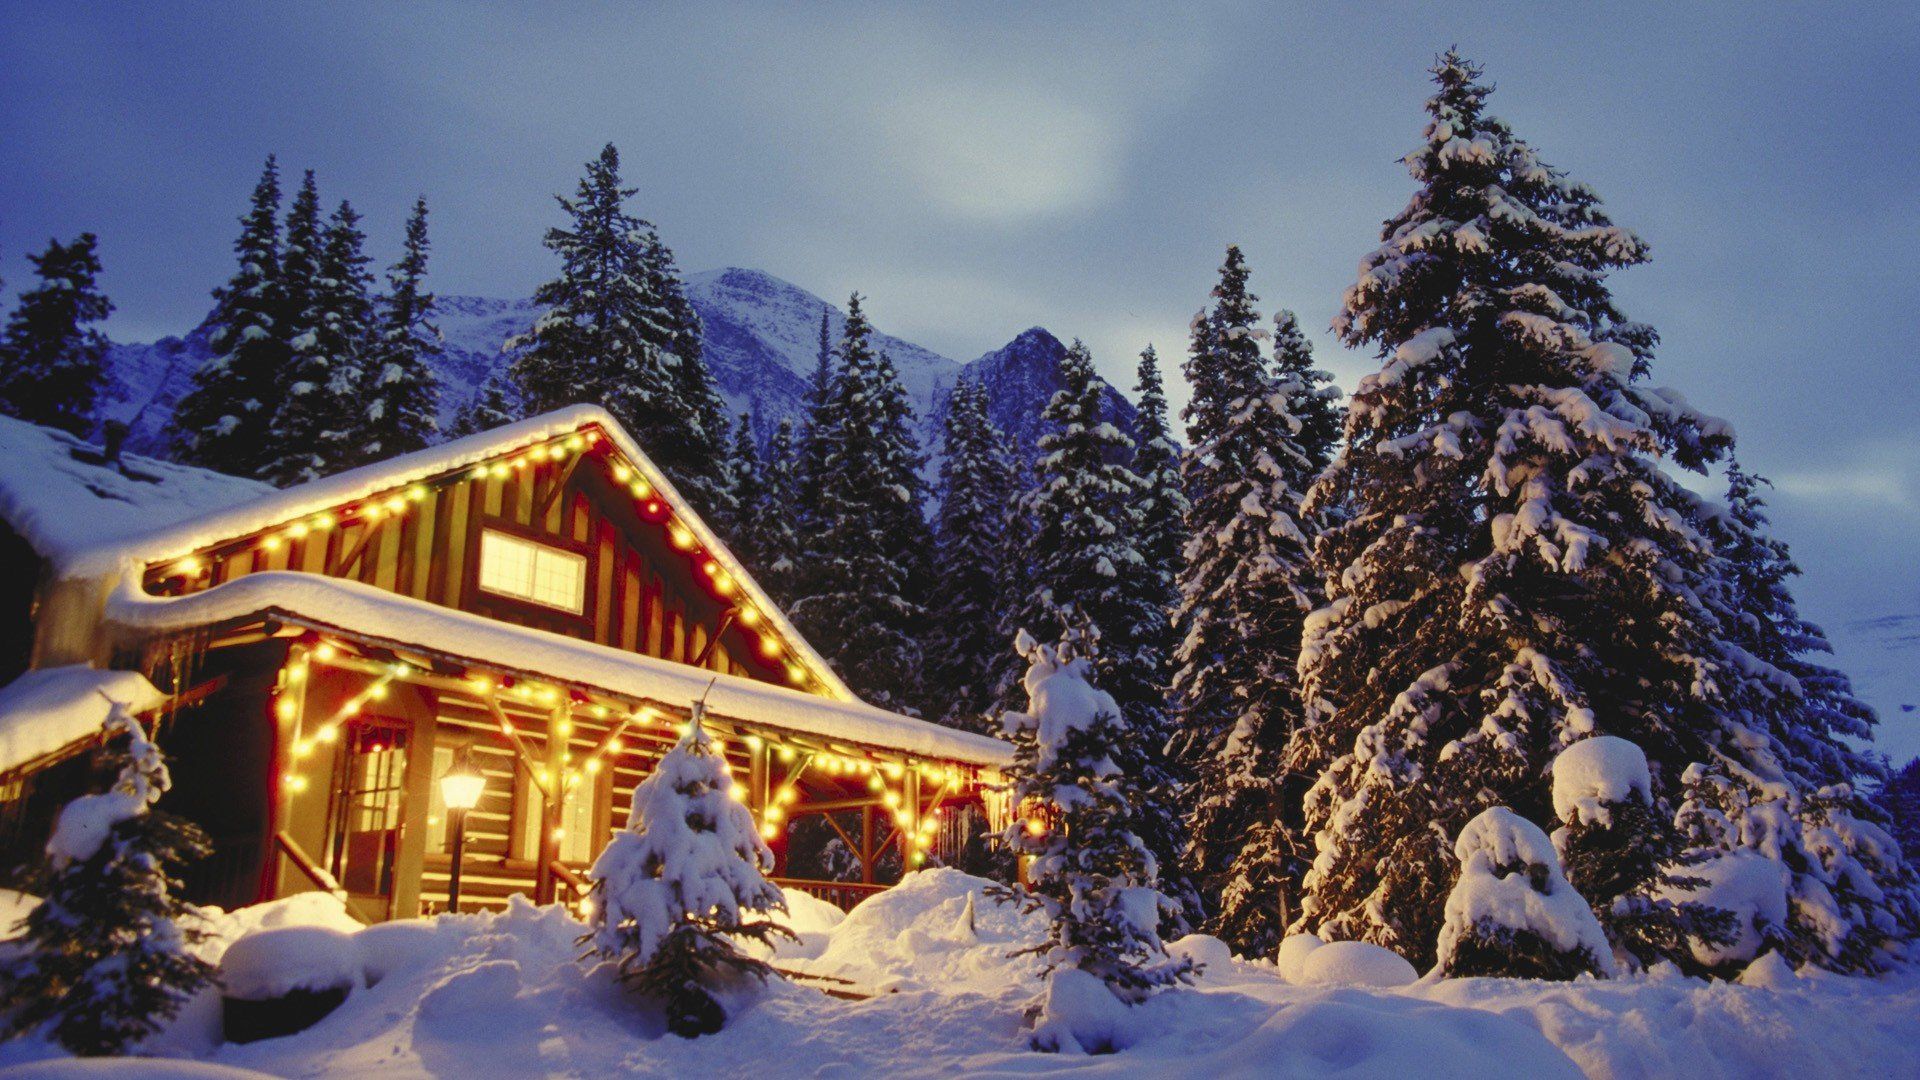 Christmas in the Mountains Wallpaper